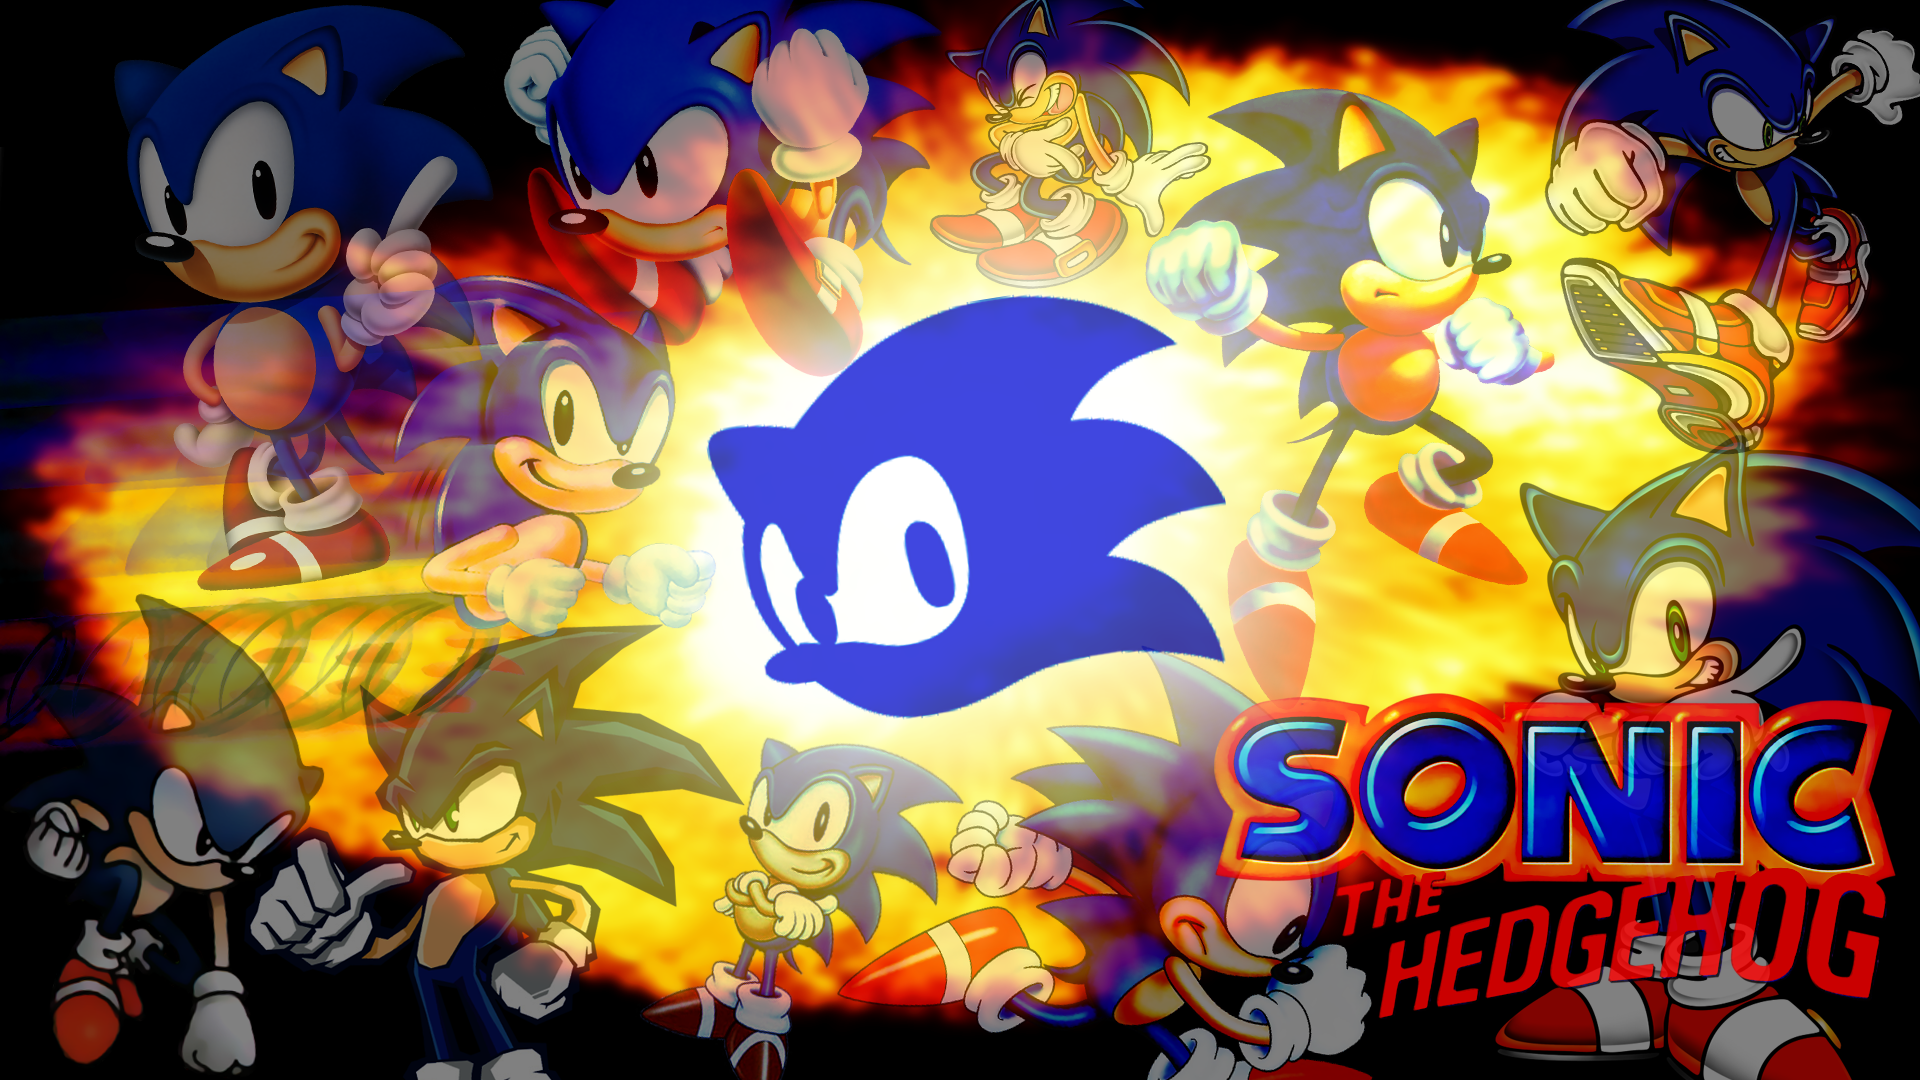 Download Classic Sonic Video Game Sonic The Hedgehog HD Wallpaper